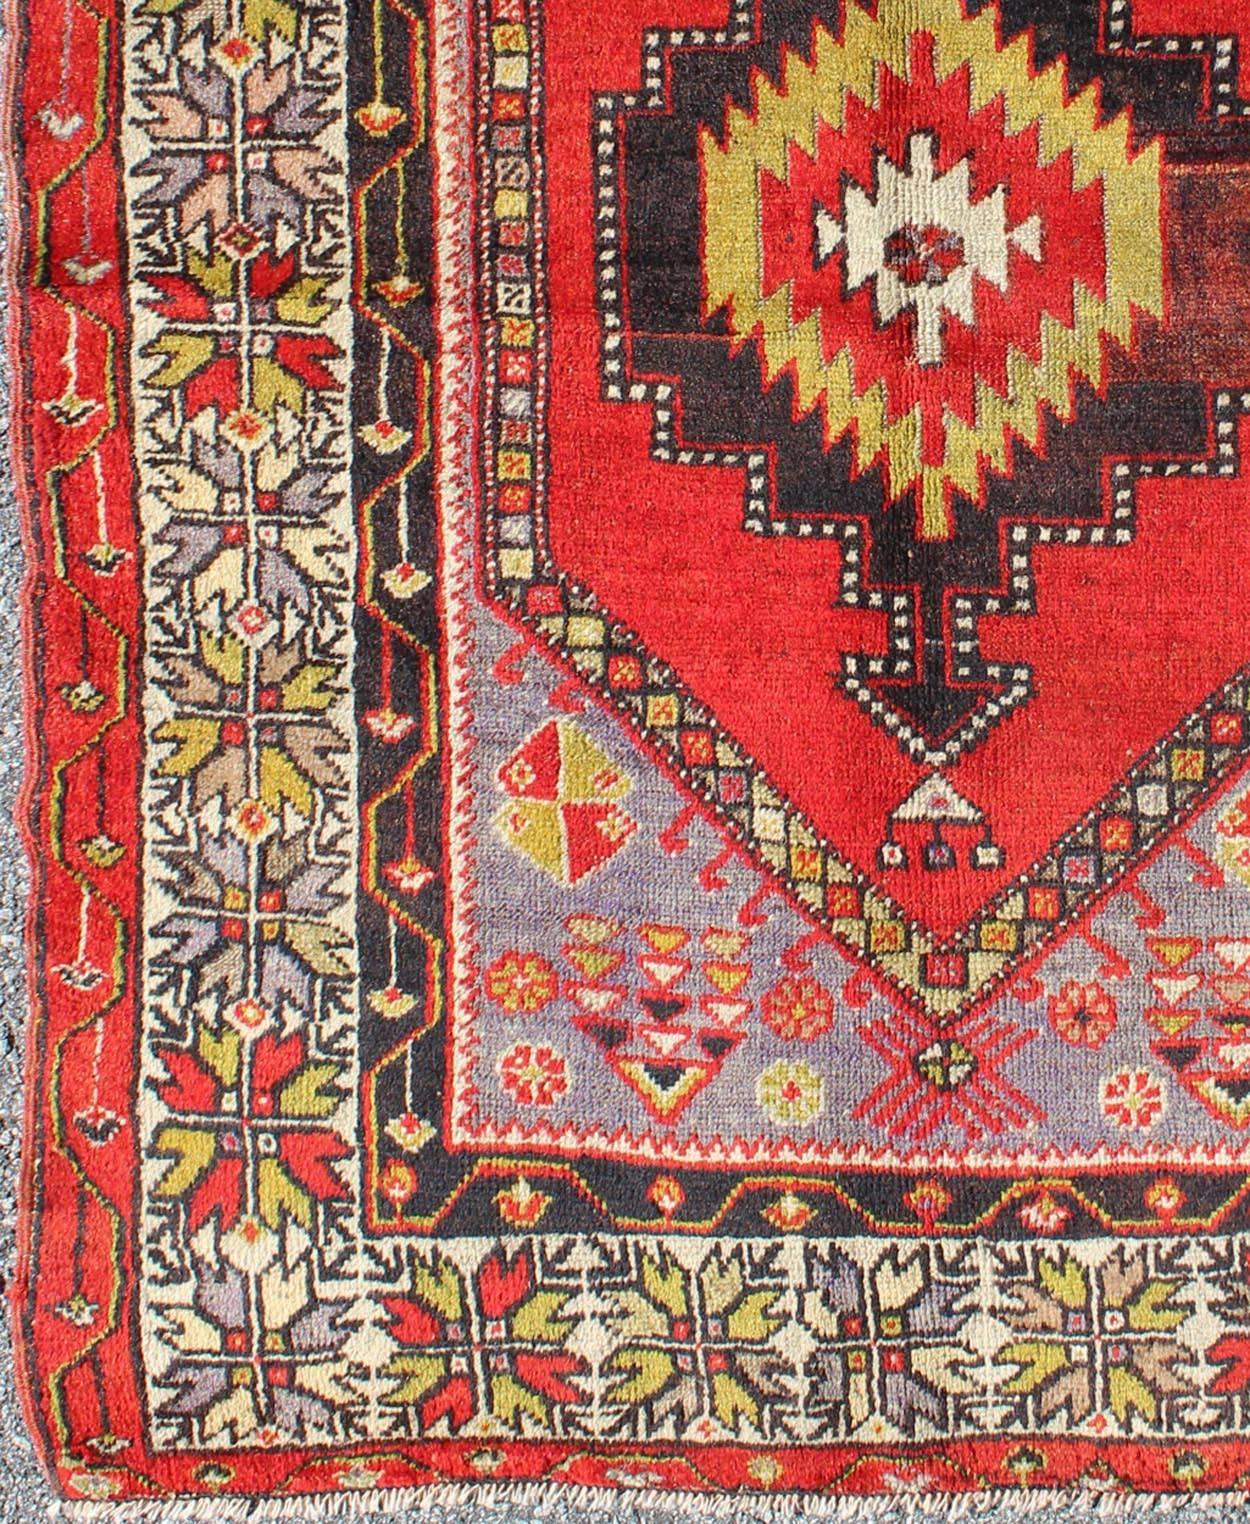 Early 20th century antique Oushak rug from Turkey with multicolored geometrics, Keivan Woven Arts / rug l11-1001, country of origin / type: Turkey / Oushak, circa 1920

This antique Oushak rug features an intricate and complex design paired with a